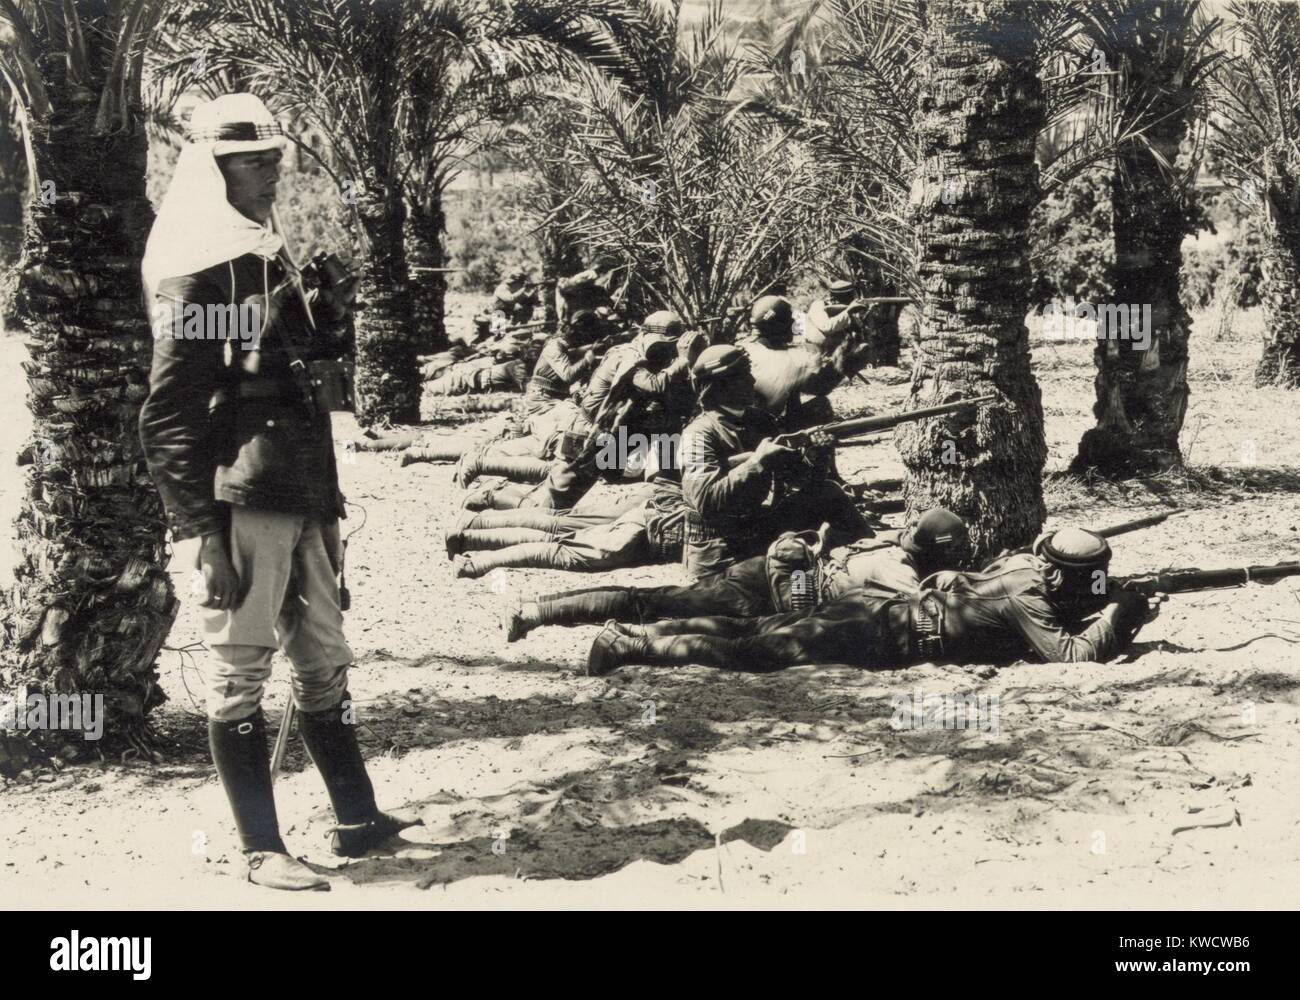 World War 1 in the Middle East. Katia east of the Suez Canal in the Sinai was the site of fighting in 1915 and 1916 when Turkish forces advised by German Kress von Kressenstein threatened the Suez canal, which was successfully defended by British Empire forces. (BSLOC 2013 1 56) Stock Photo